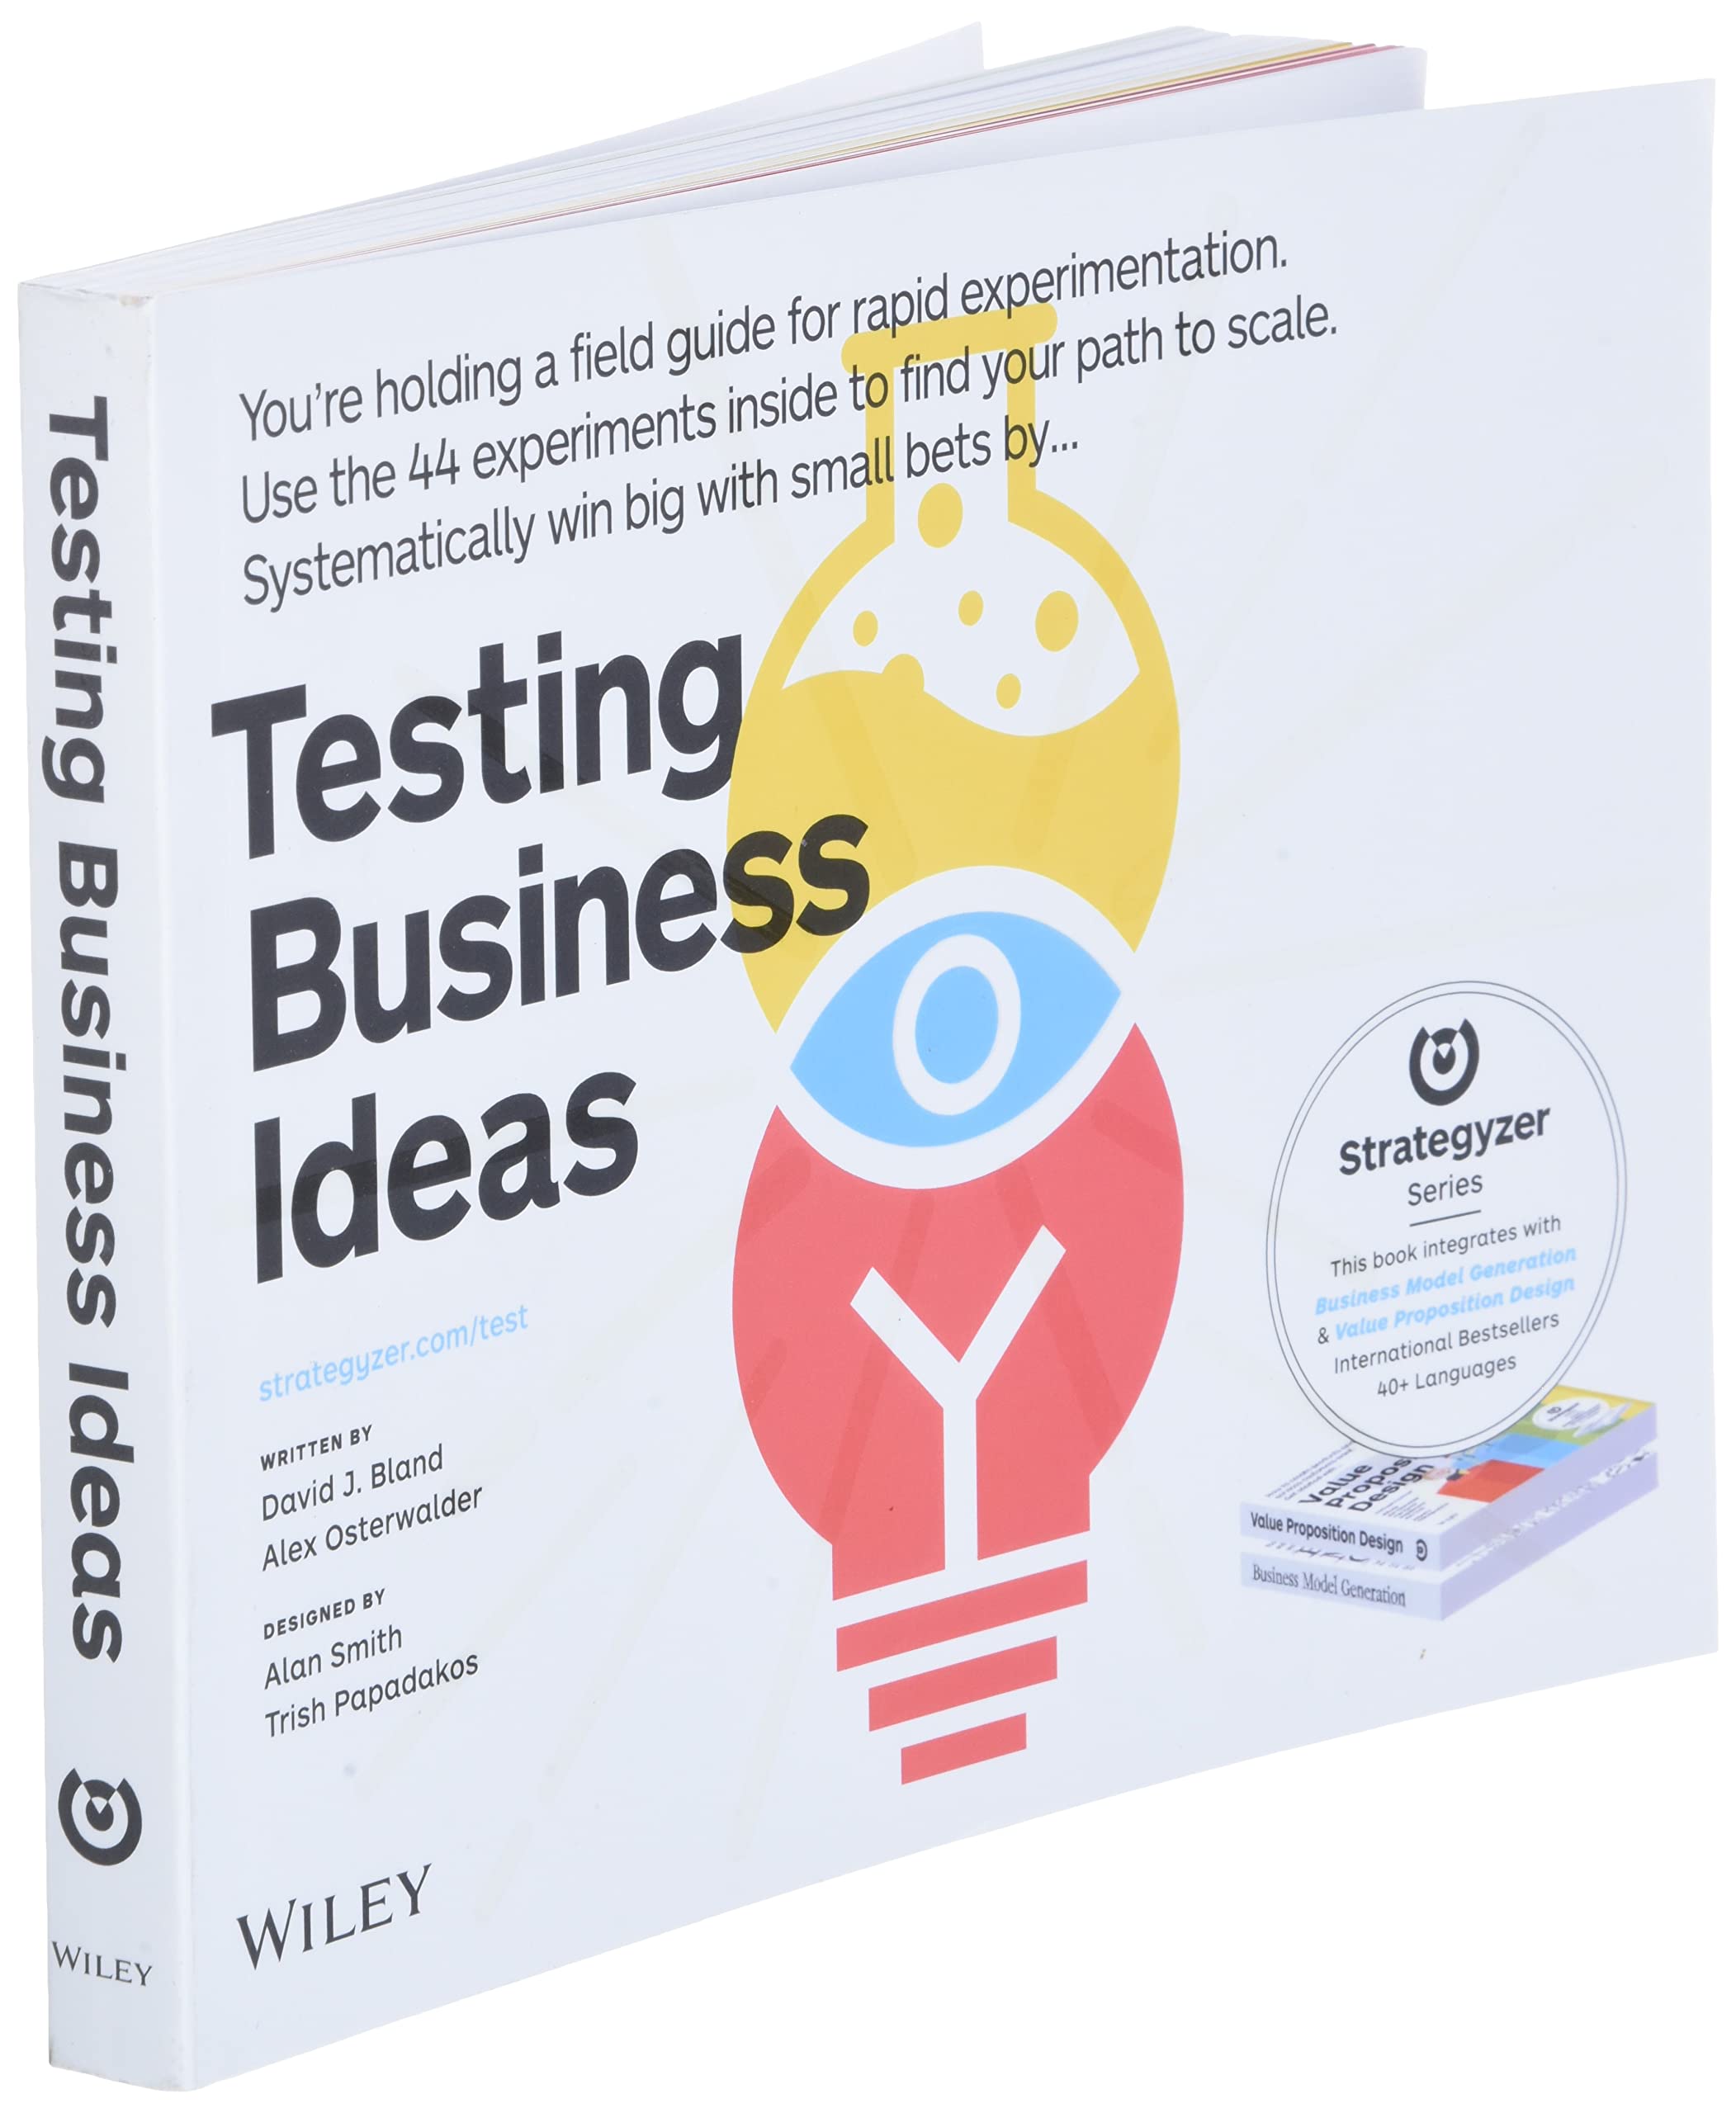 Testing Business Ideas A Field Guide for Rapid Experimentation by David J Bland